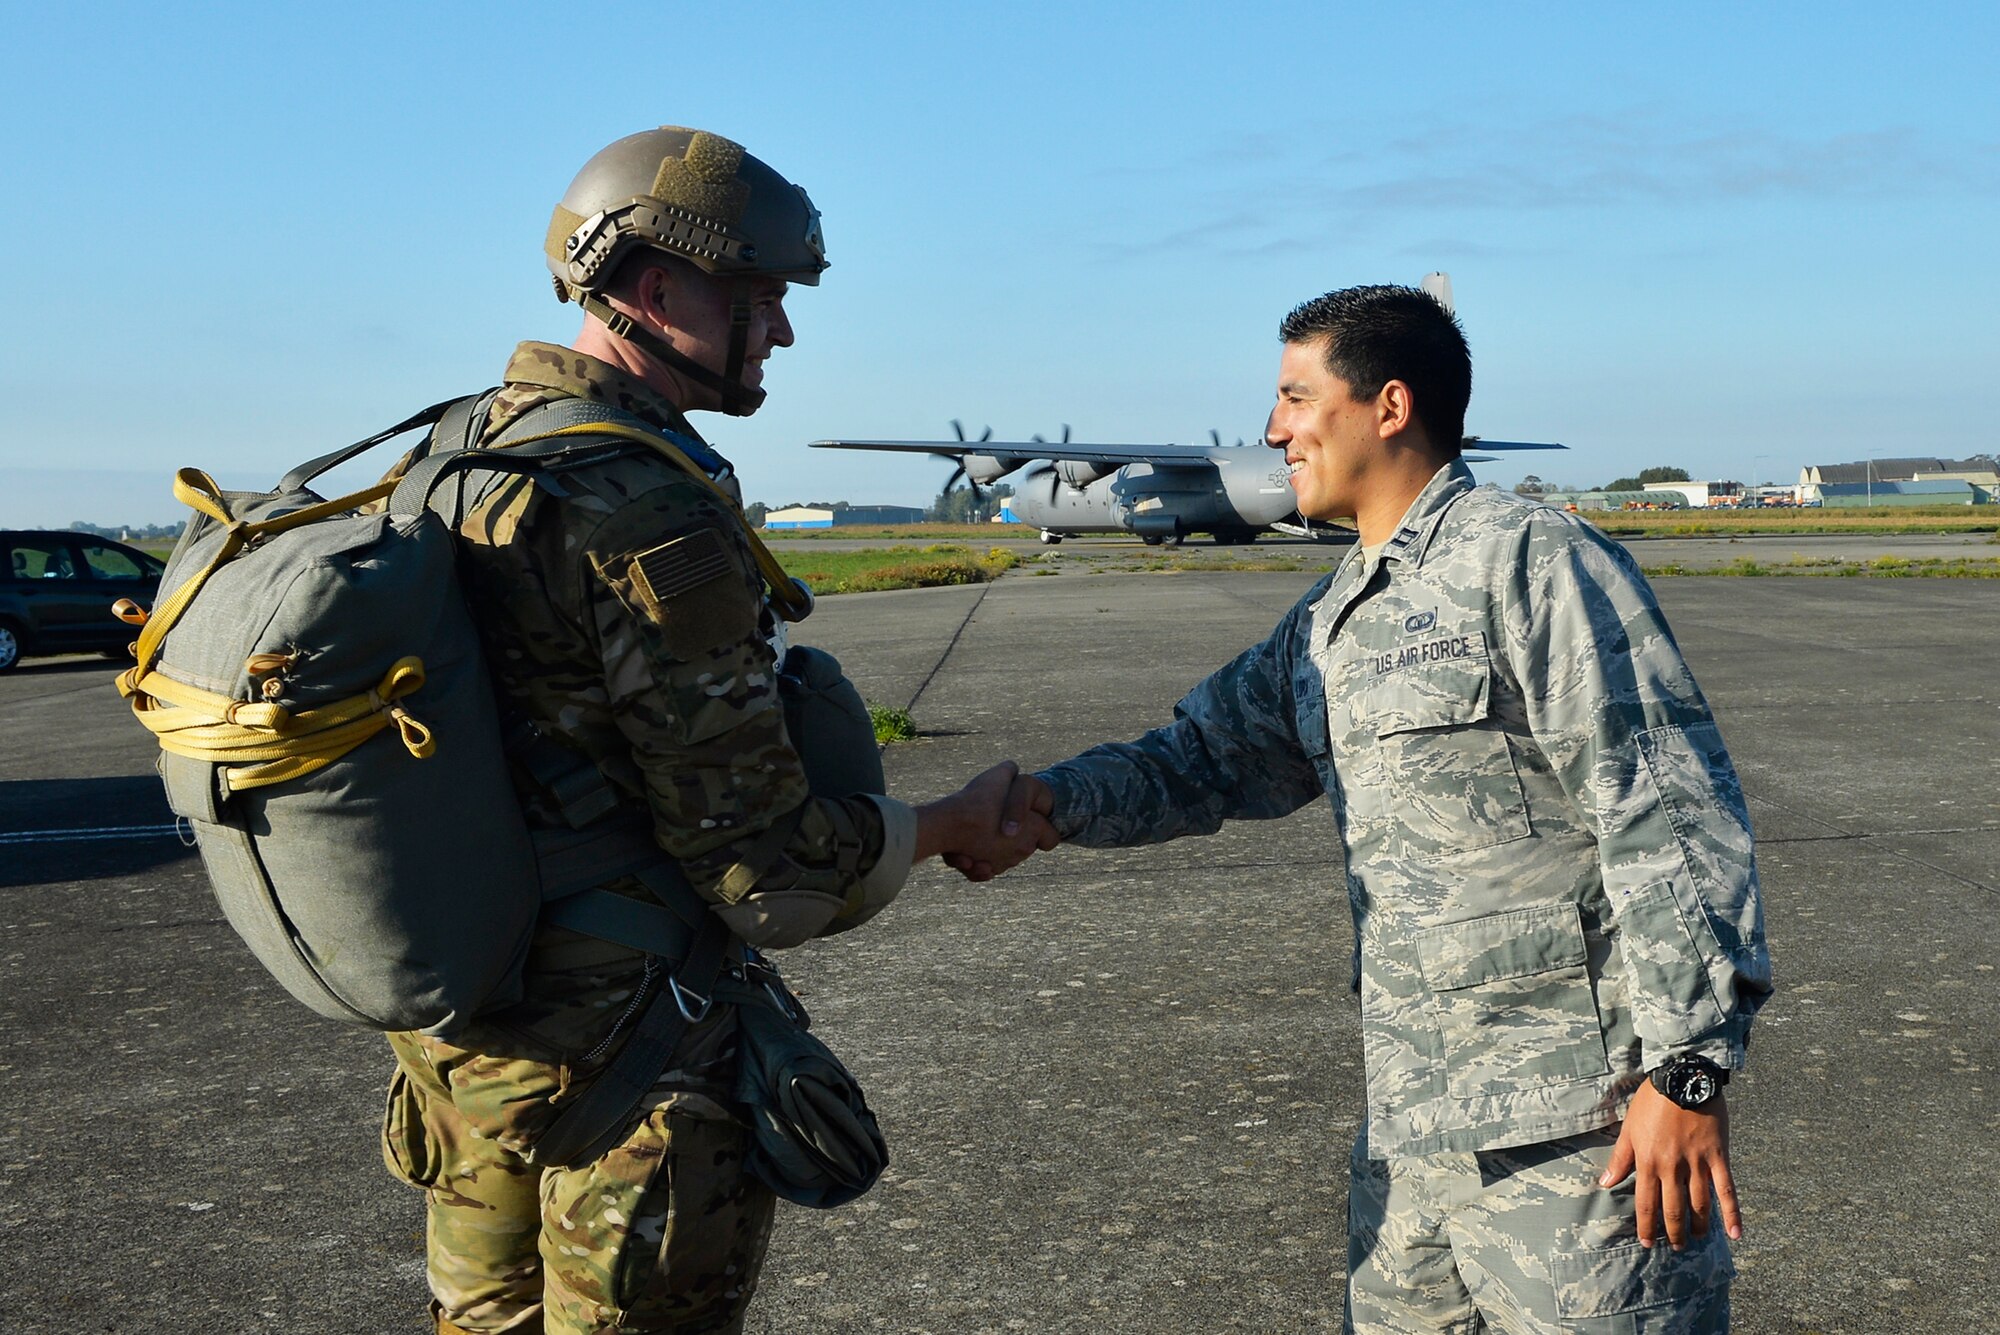 U.S. Air Force Capt. Christian Lora, 424th Air Base Squadron airfield operations flight commander, right, shakes hands with a 435th Air Ground Operations Wing paratrooper on Chievres Air Base, Belgium, Oct. 4, 2018. As a geographically separated unit of the 86th Airlift Wing at Ramstein Air Base, Germany, the 424th ABS conducts airfield support operations for U.S. and NATO forces. (U.S. Air Force photo by Senior Airman Joshua Magbanua)